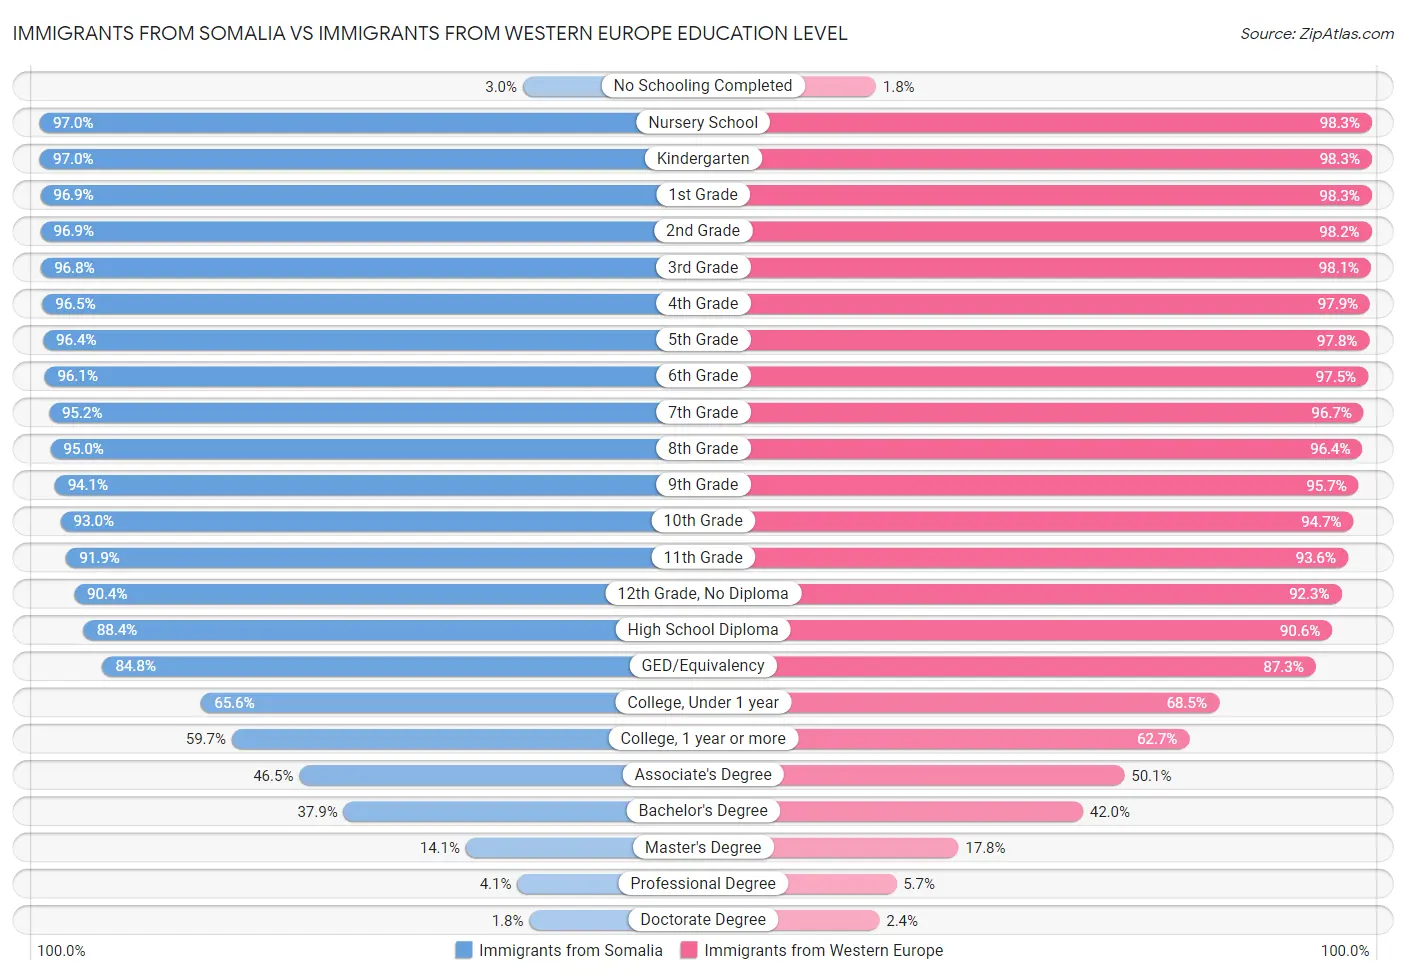 Immigrants from Somalia vs Immigrants from Western Europe Education Level